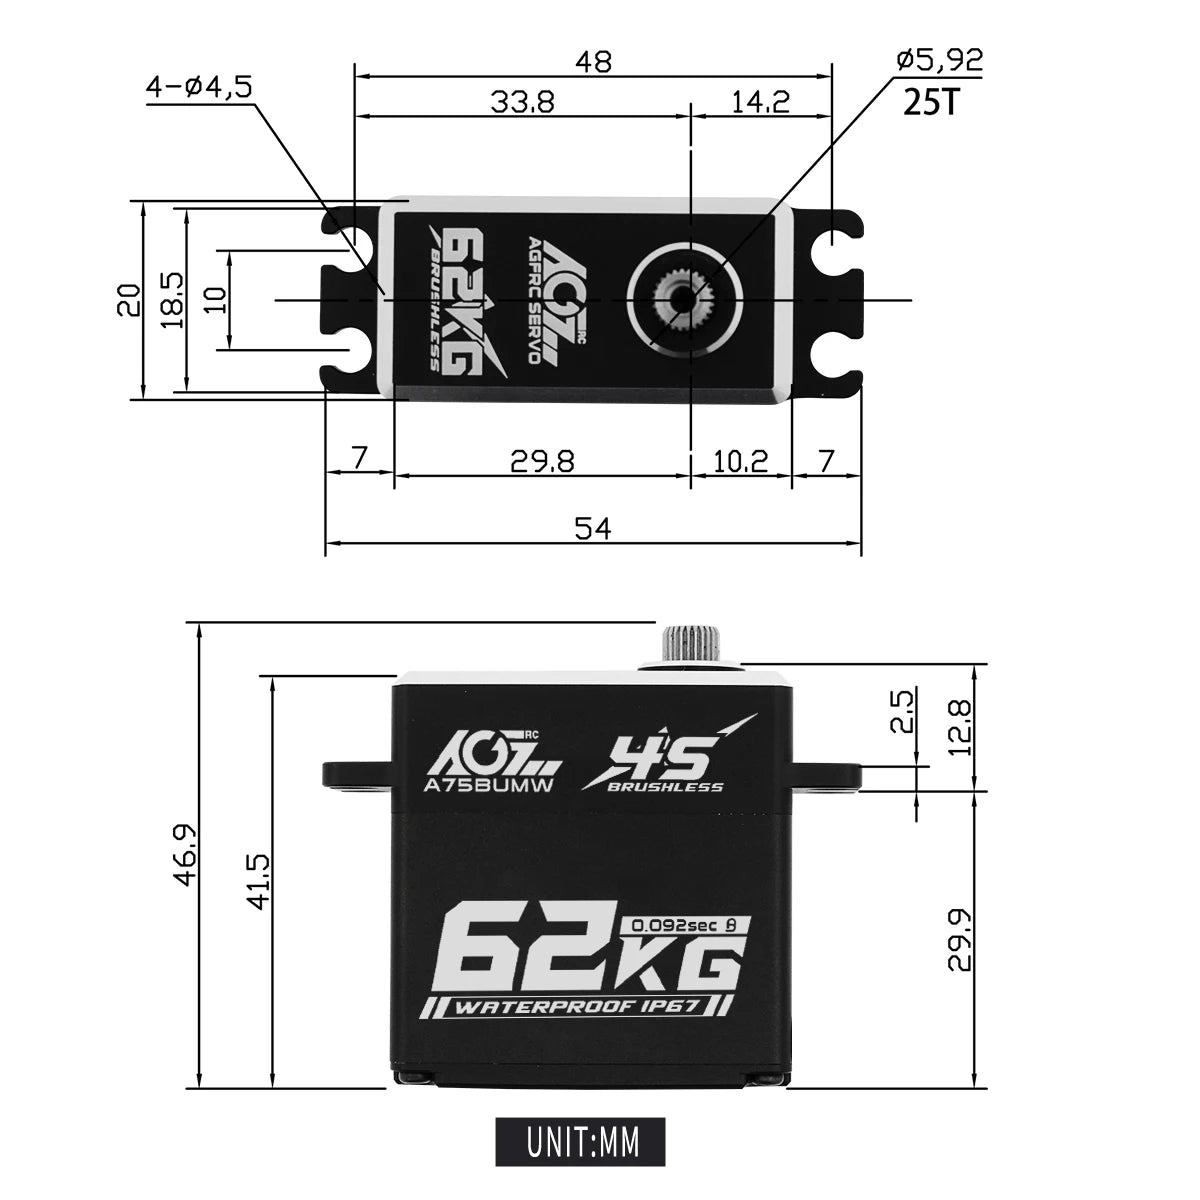 AGFRC A75BUMW, since 2009, AGFRC has been focus on all series of RC servos